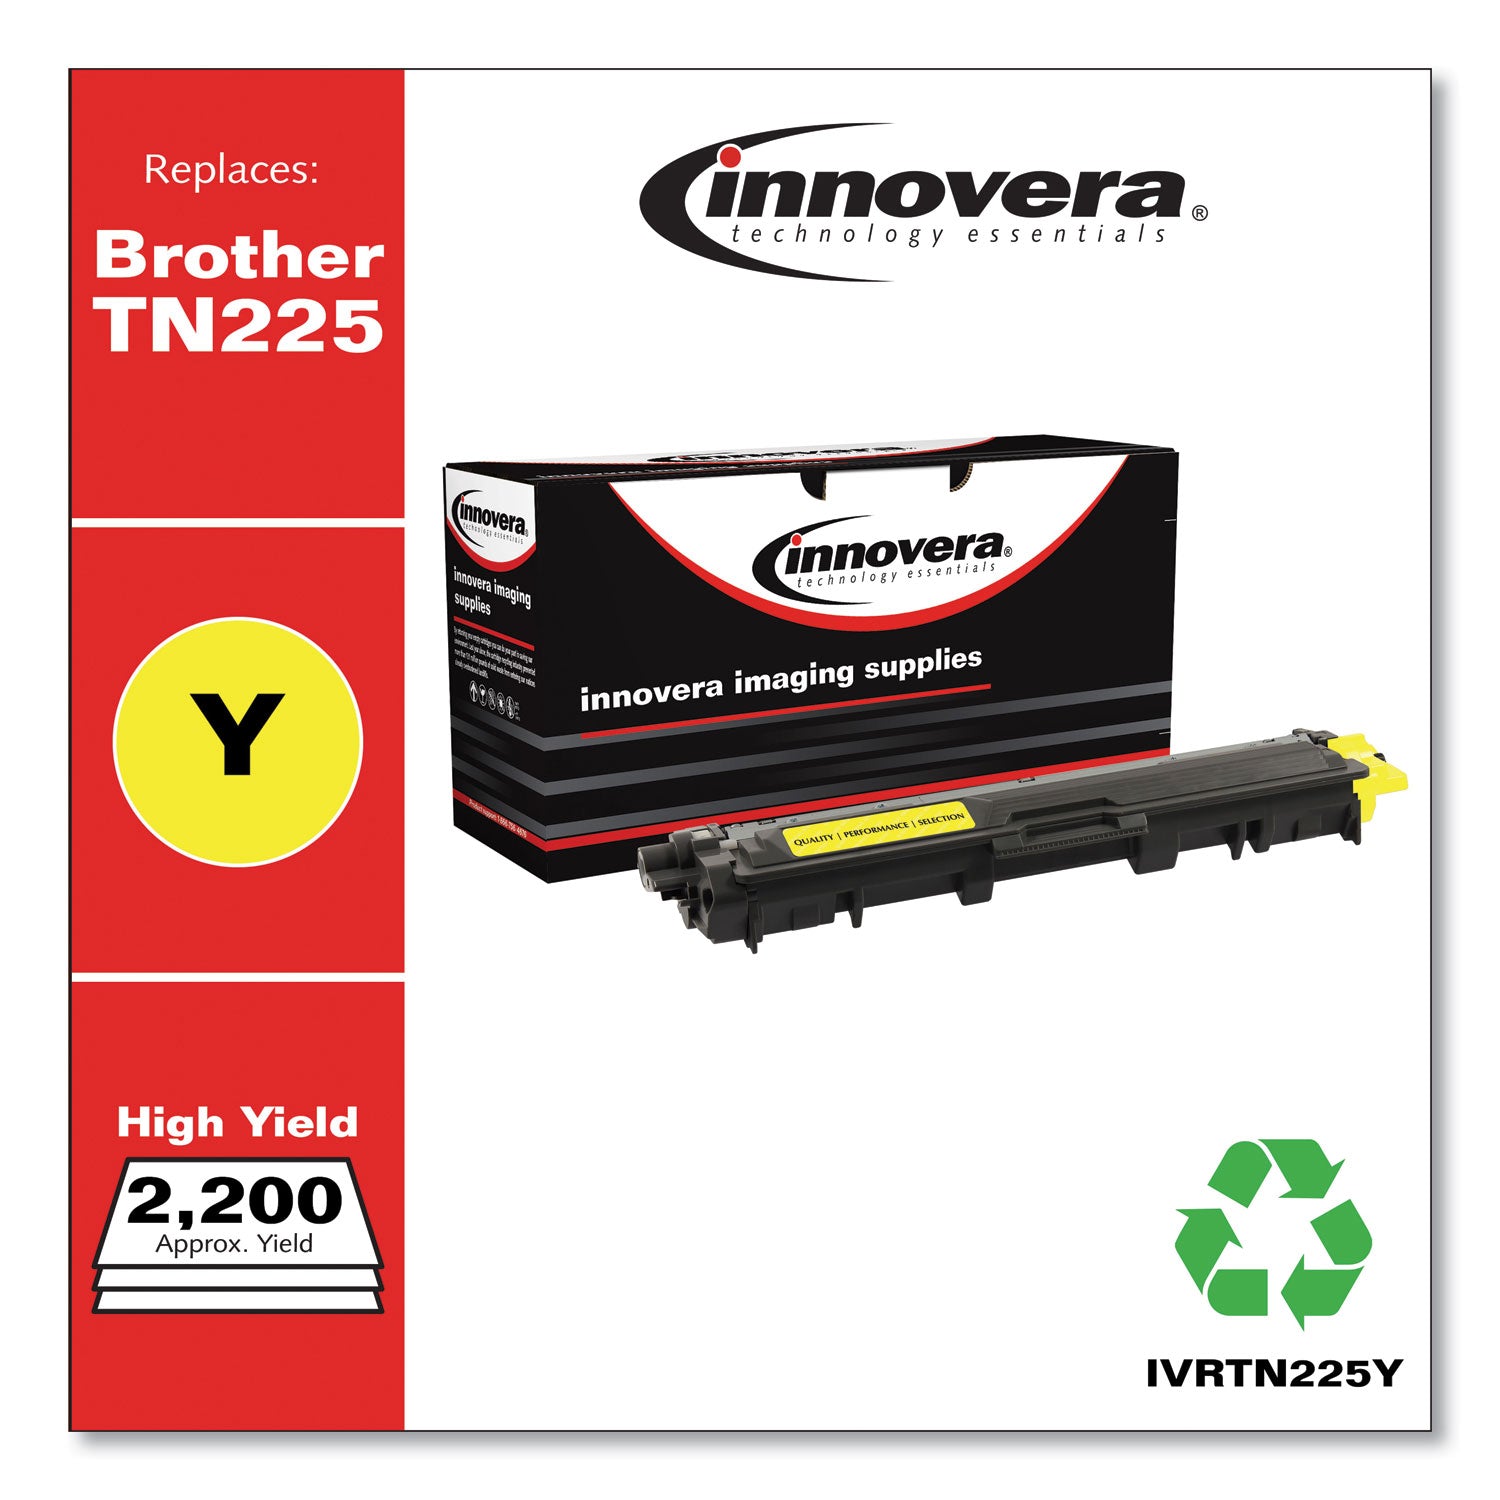 remanufactured-yellow-high-yield-toner-replacement-for-tn225y-2200-page-yield-ships-in-1-3-business-days_ivrtn225y - 2